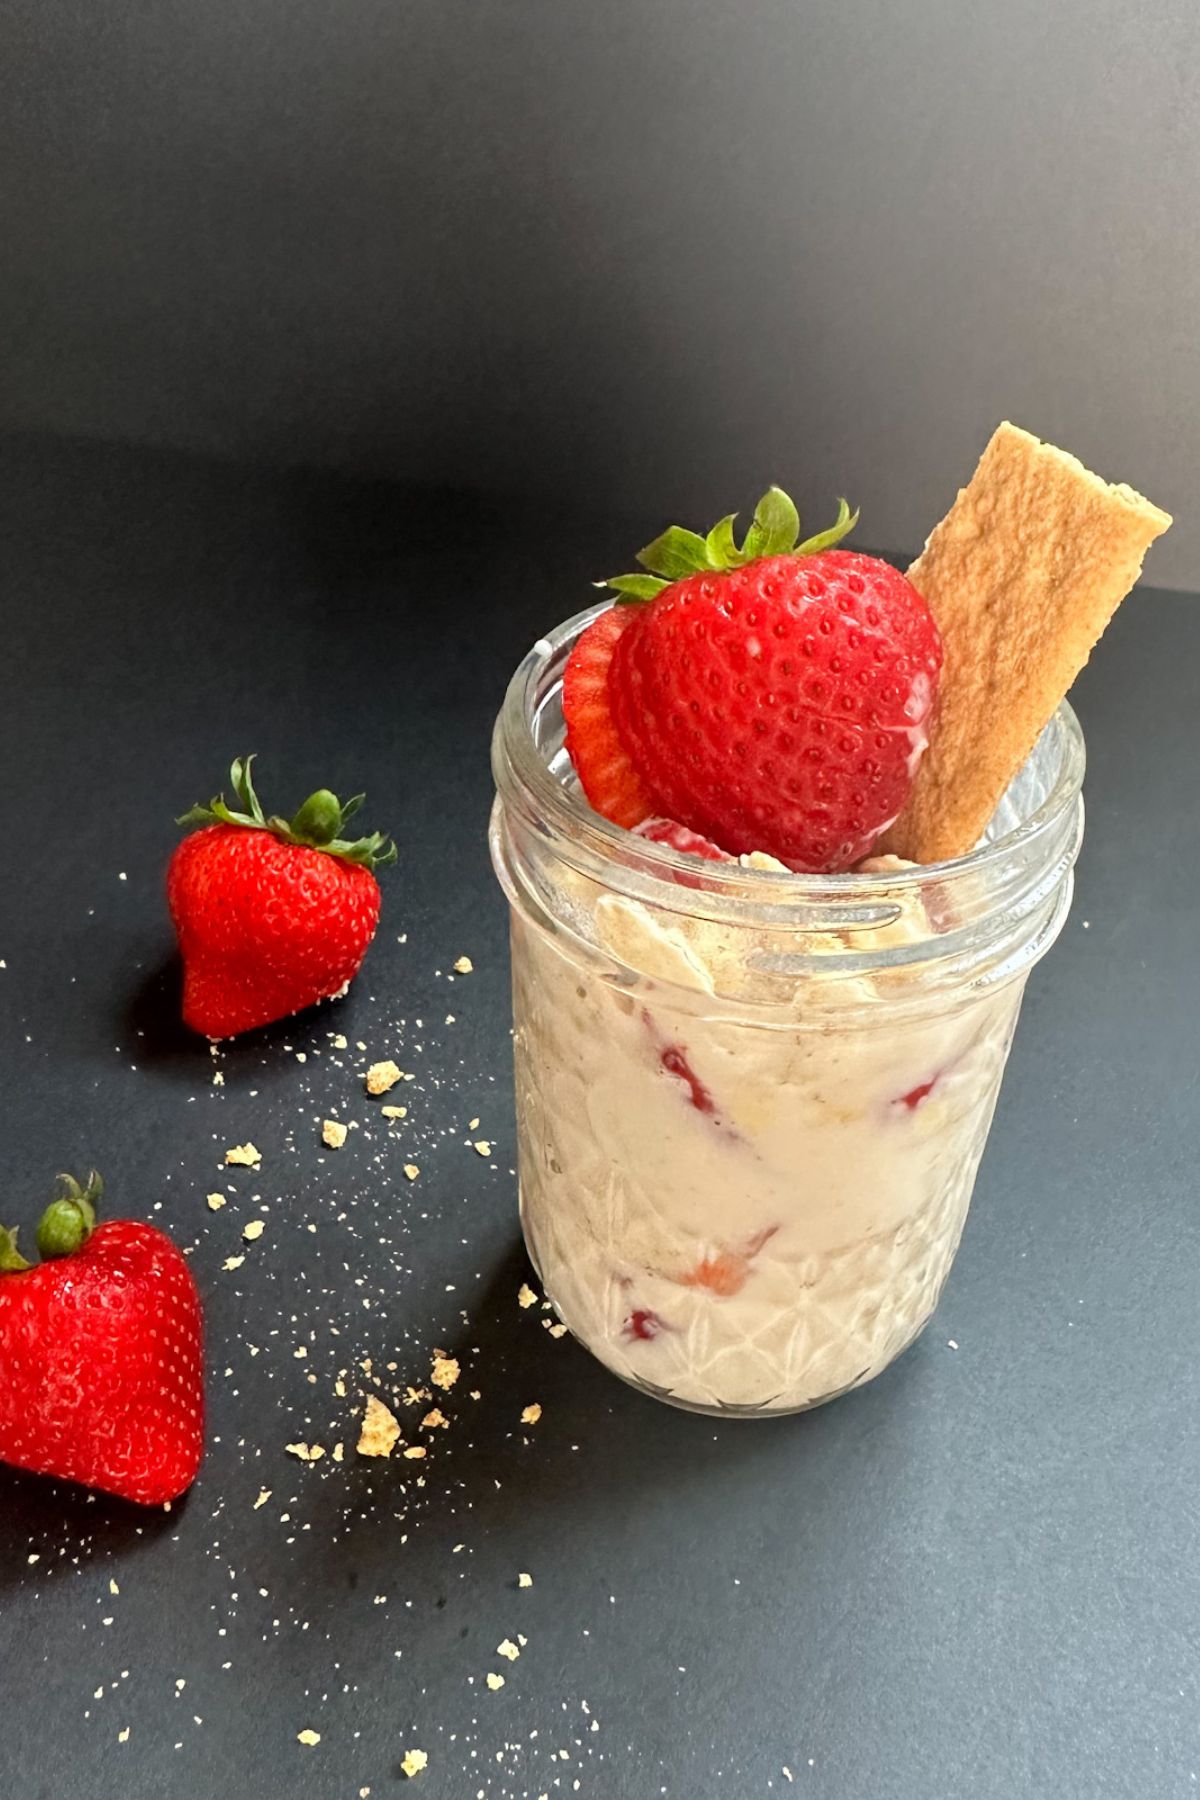 Jar of Strawberry Cheesecake Oats with strawberries.